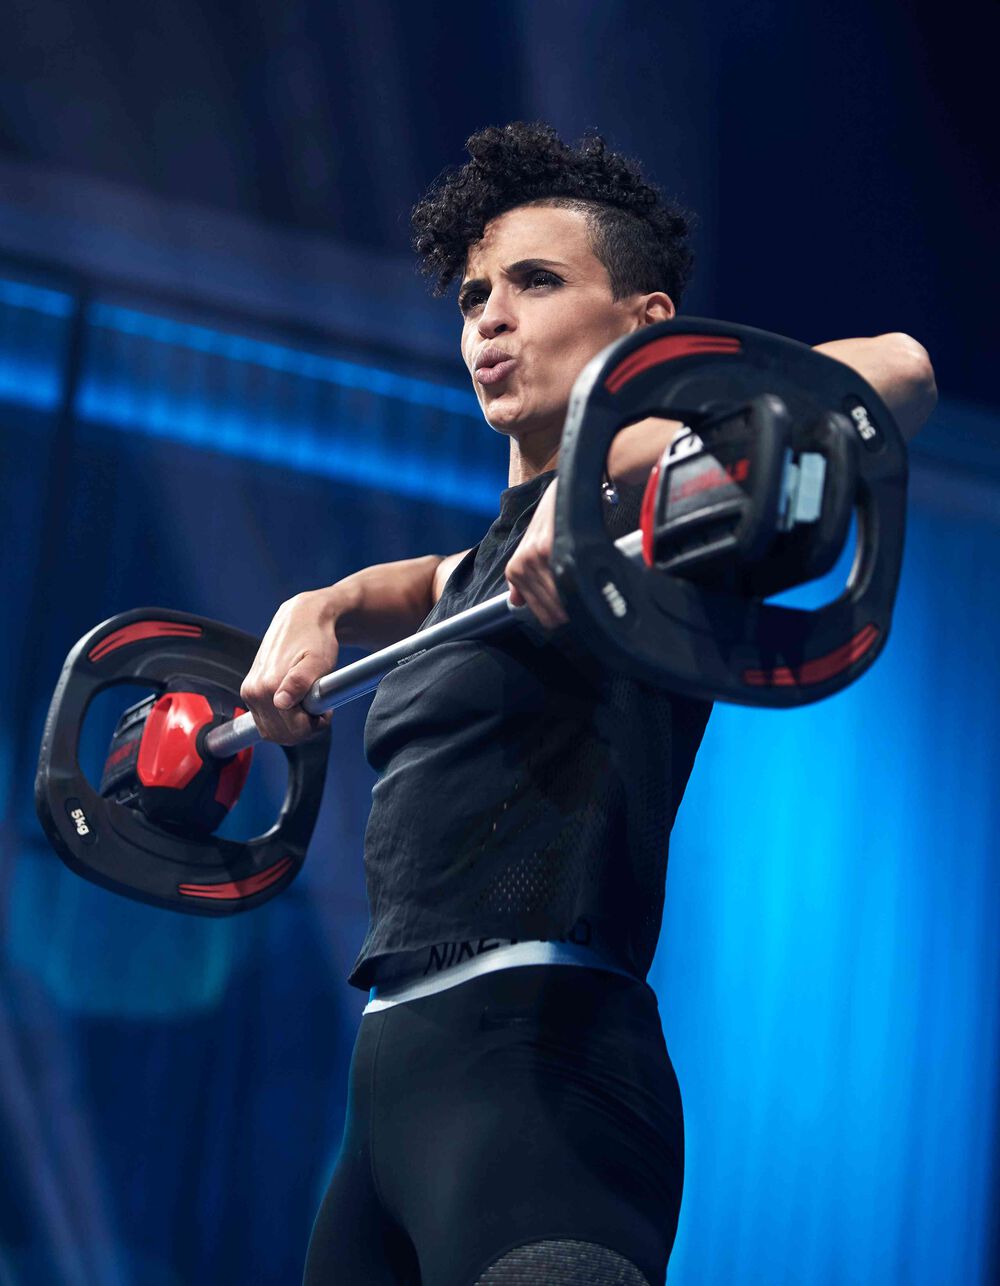 Video presenter Yassi working out with a barbell